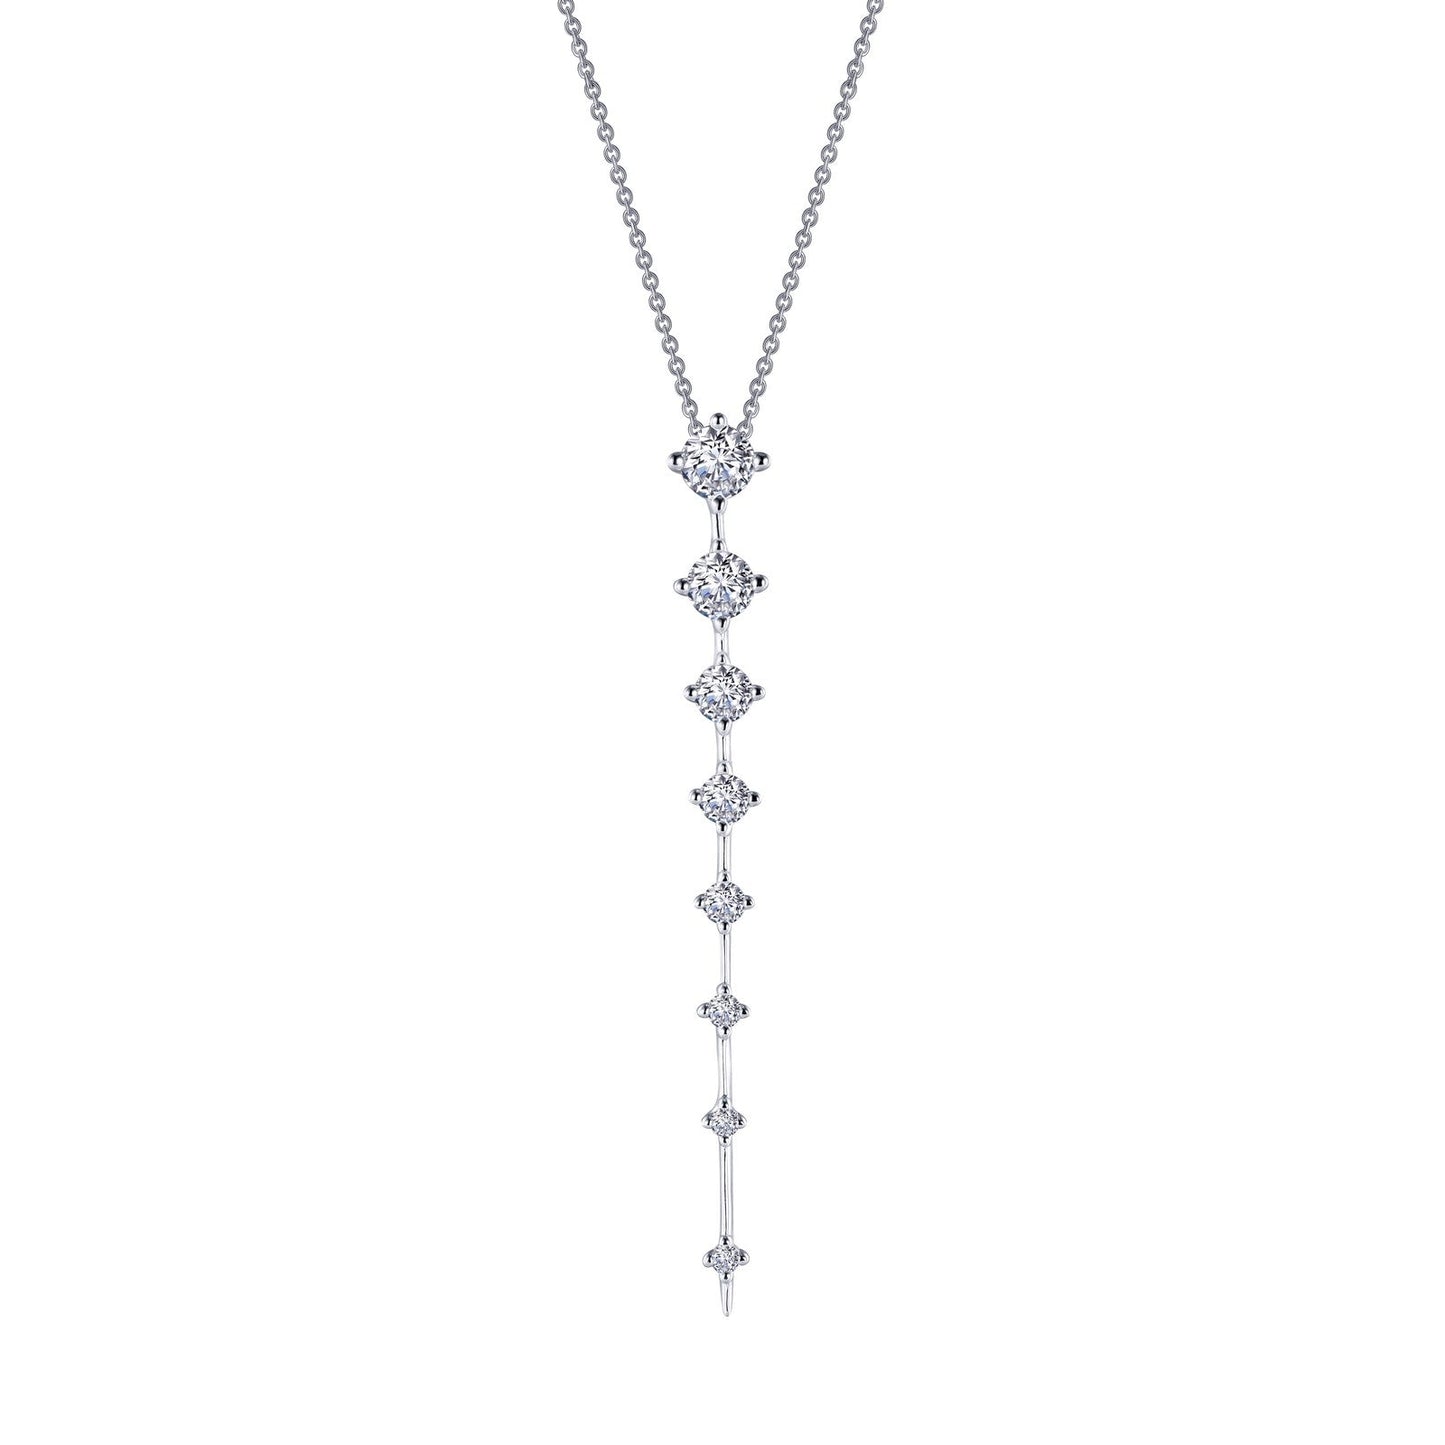 Adjustable Icicle Necklace